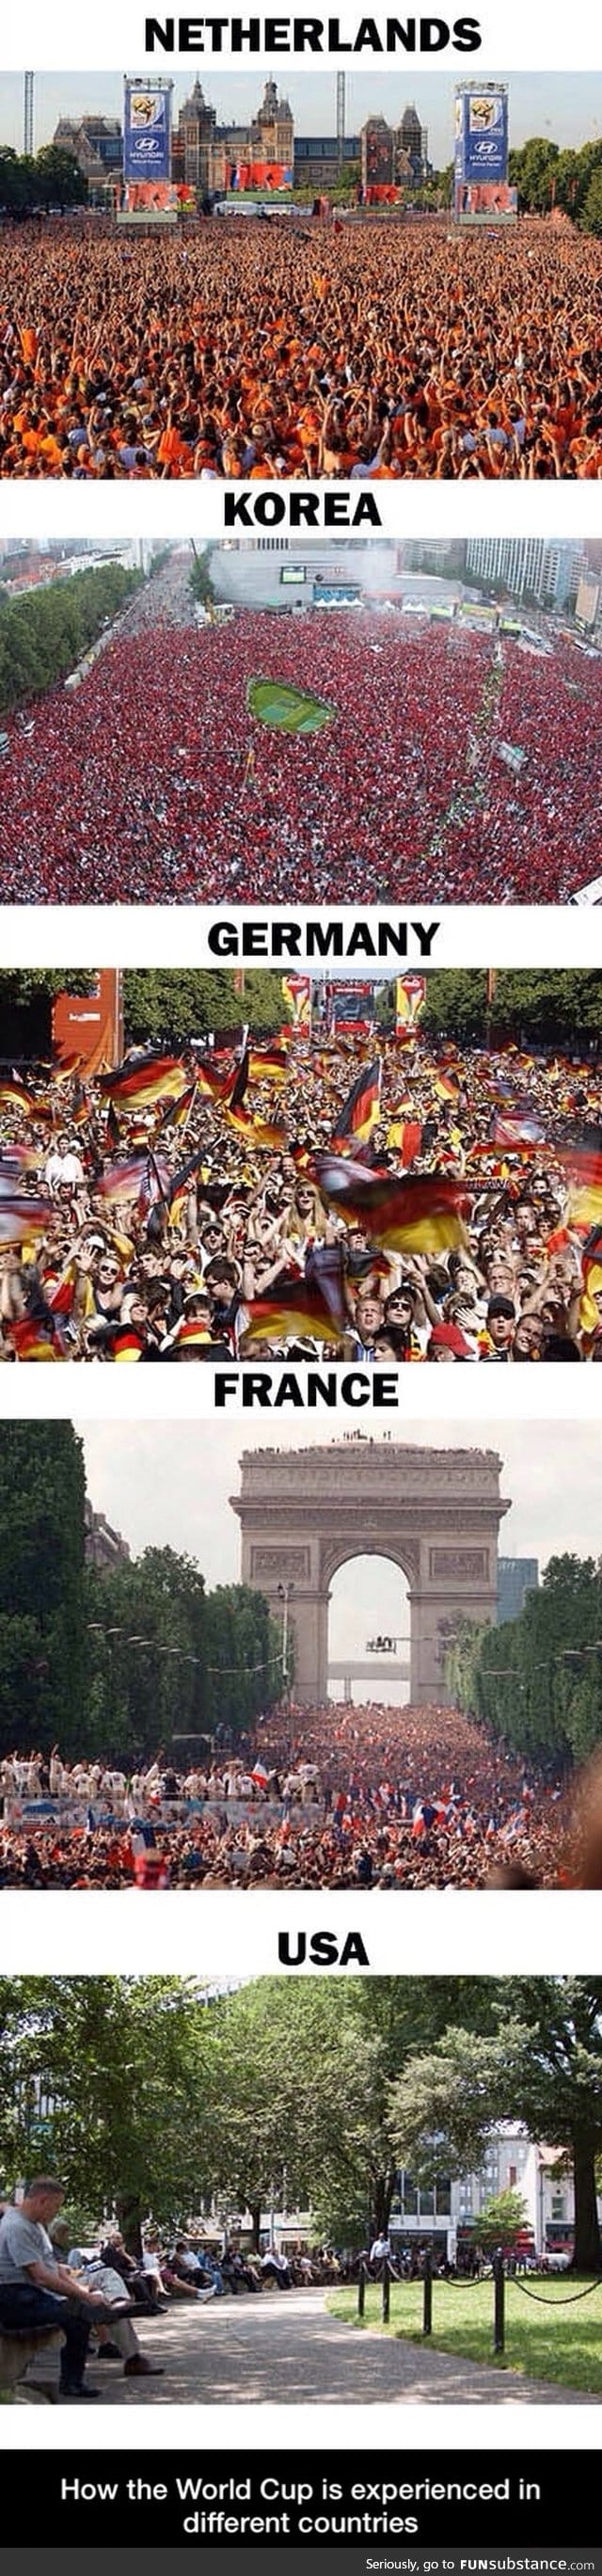 World cup in different countries